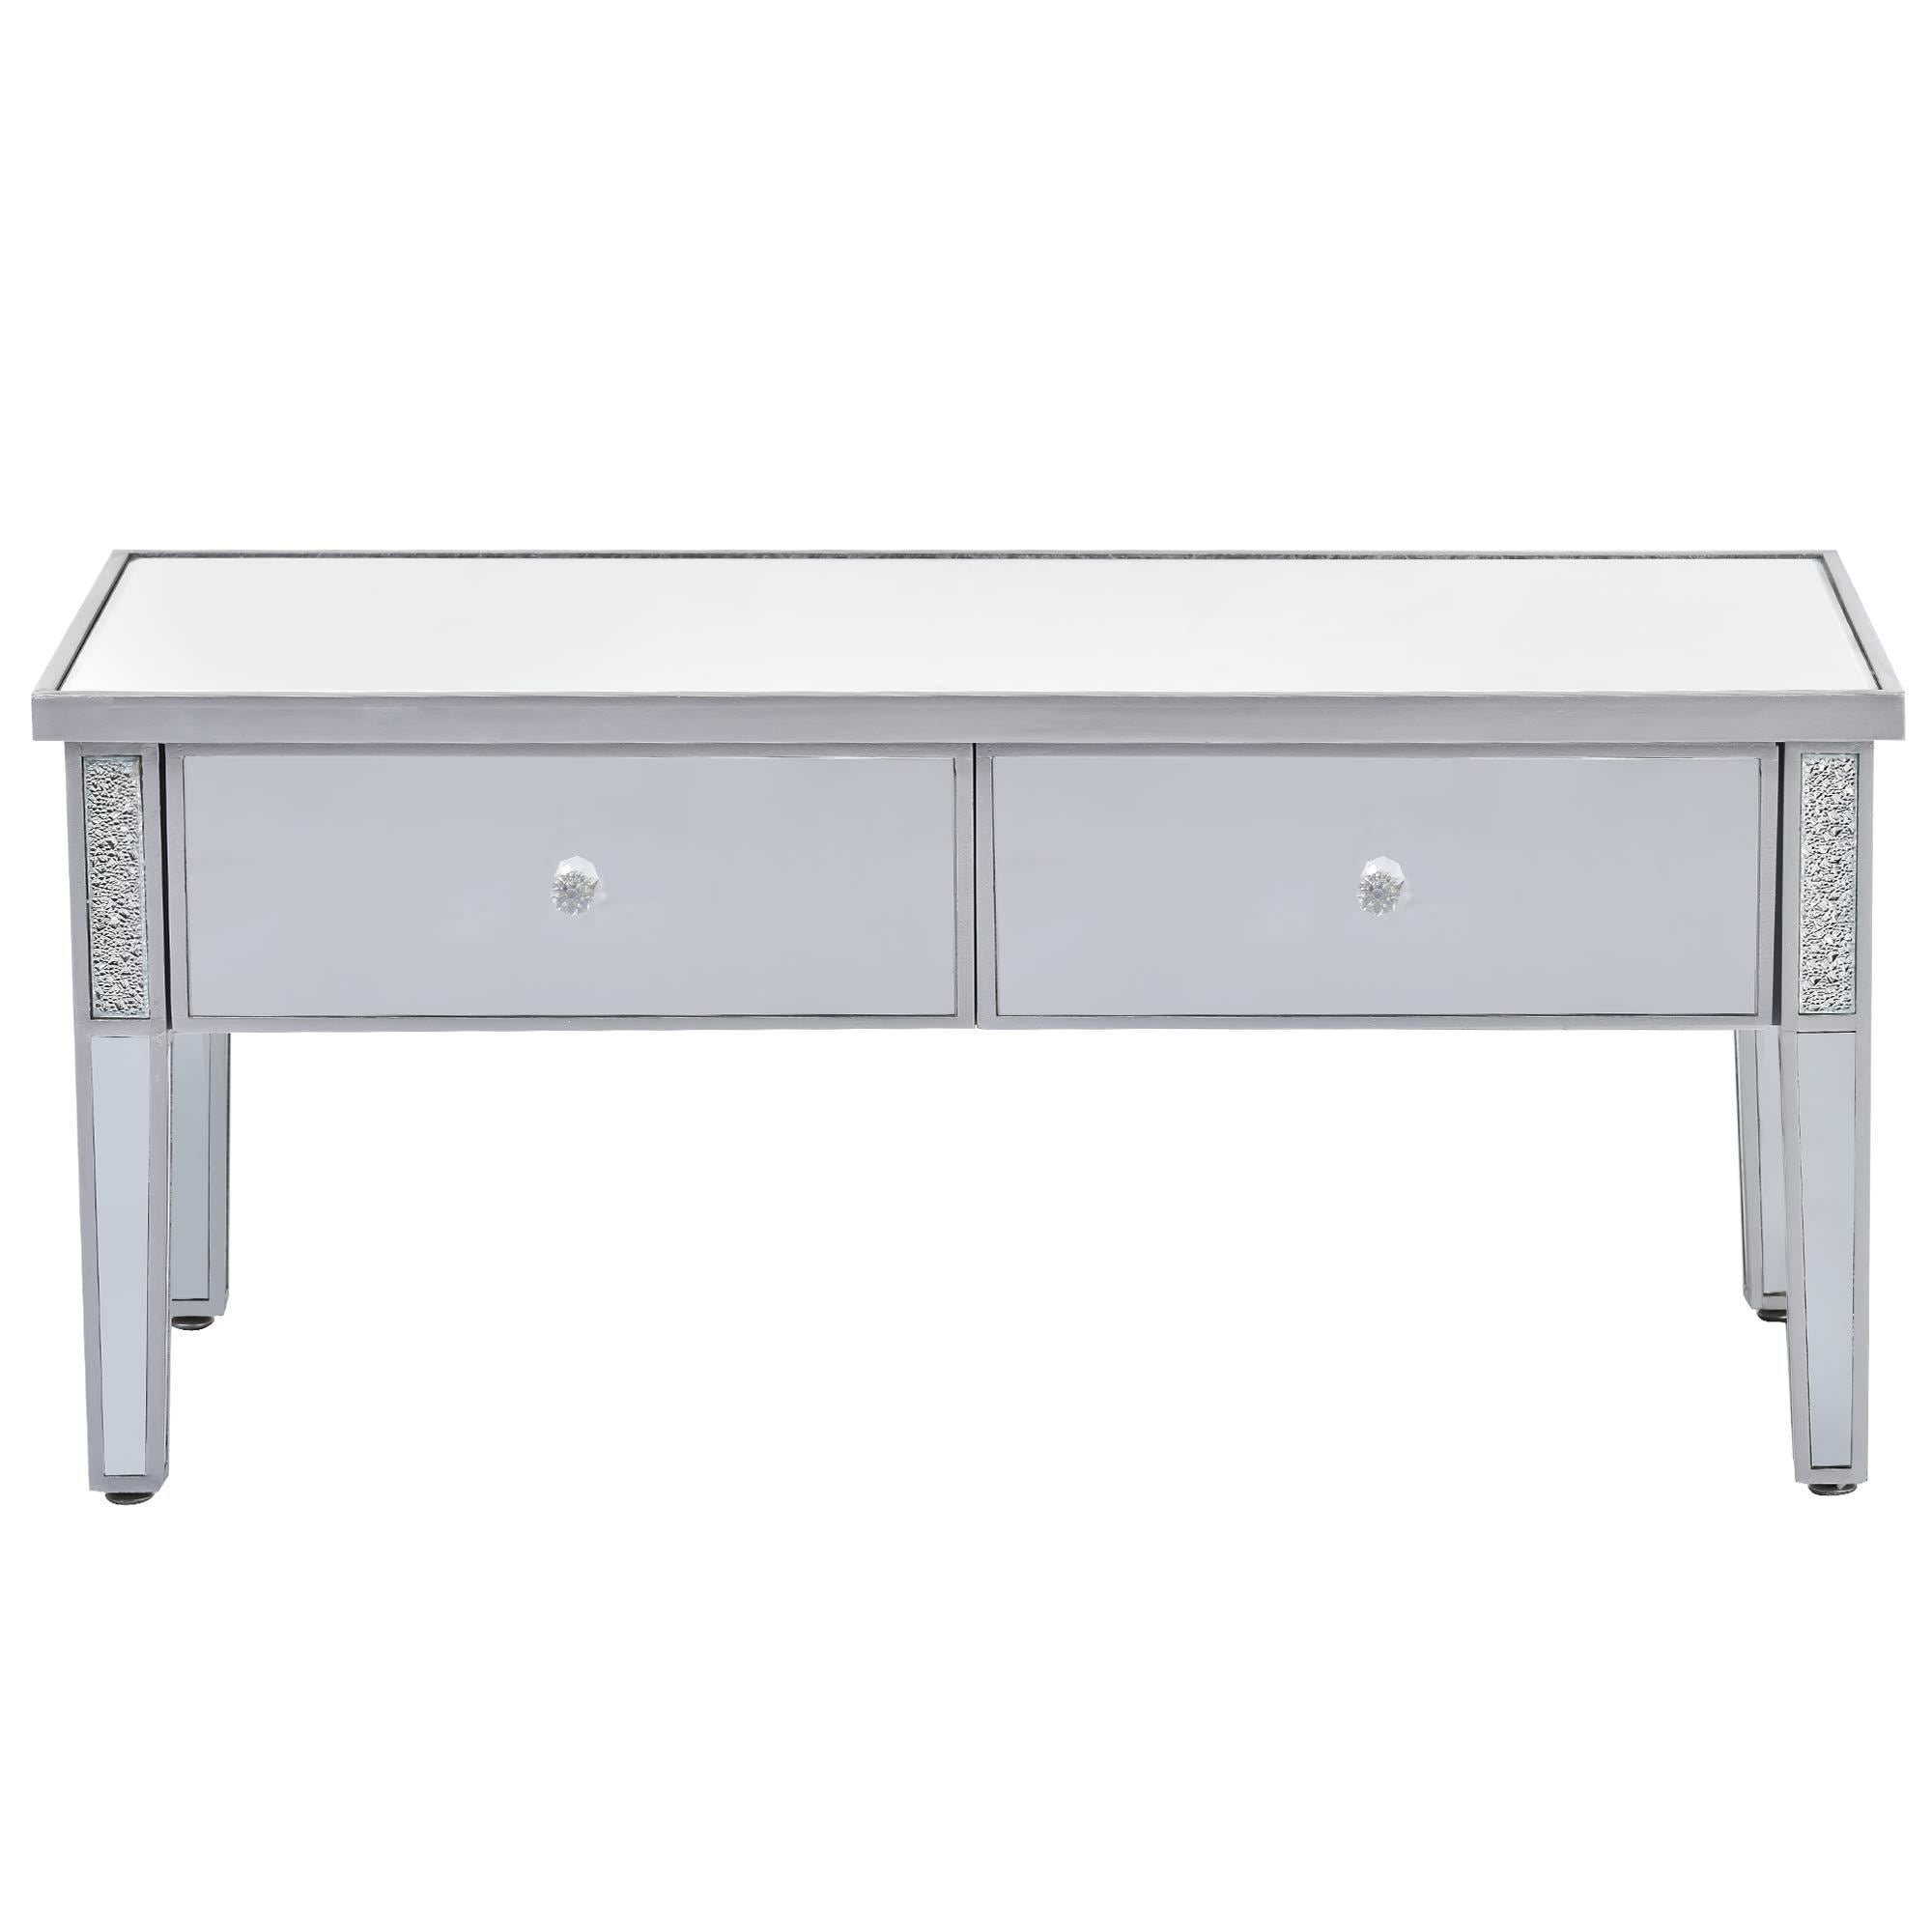 Modern Glass Mirrored Coffee Table with 2 Drawers, Cocktail Table with Crystal Handles and Adjustable Height Legs - Silver